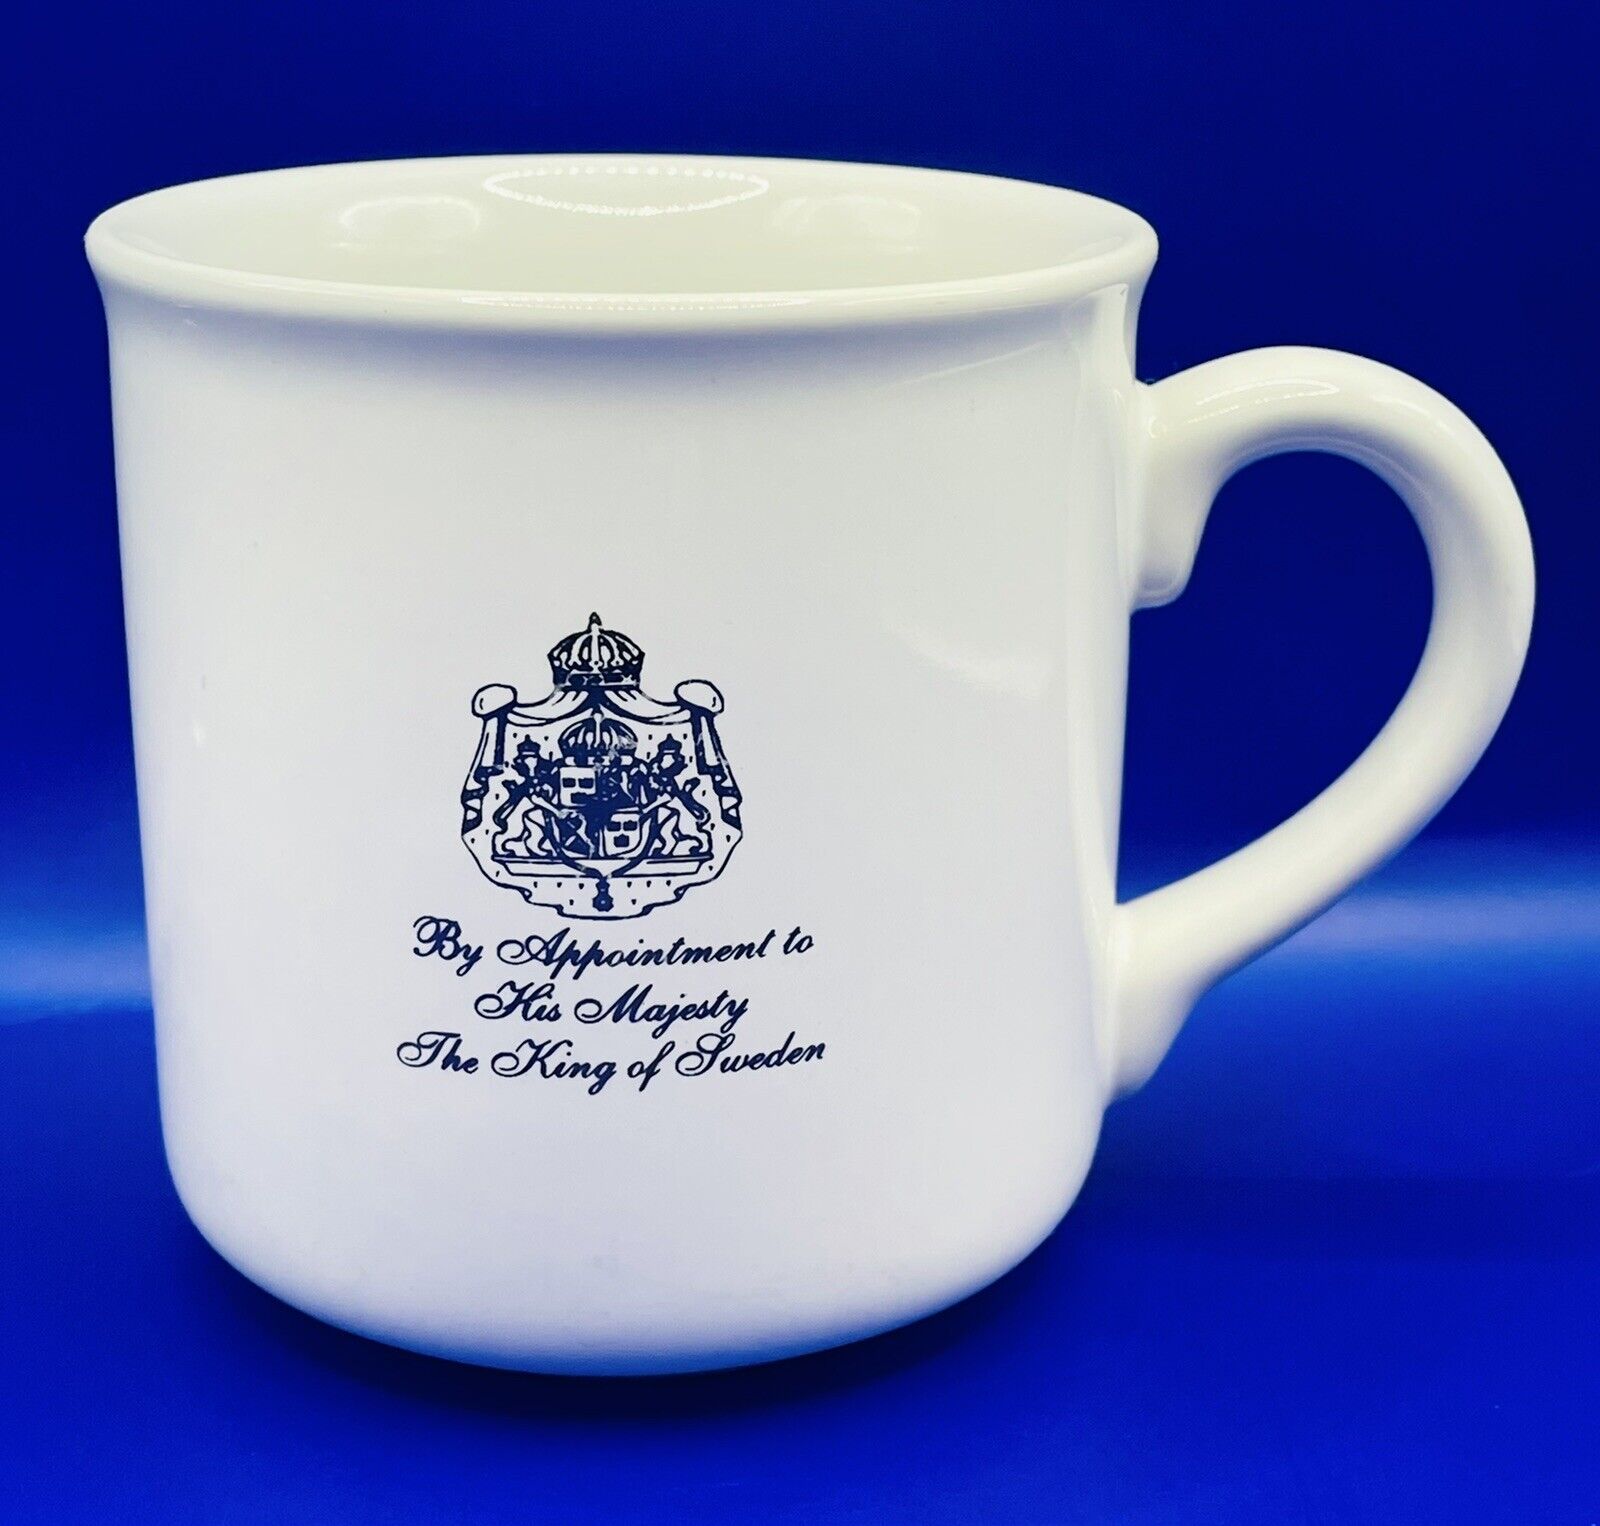 Gevalia Kaffee Coffee Cup/Mug - By Appointment To His Majesty The King Of Sweden